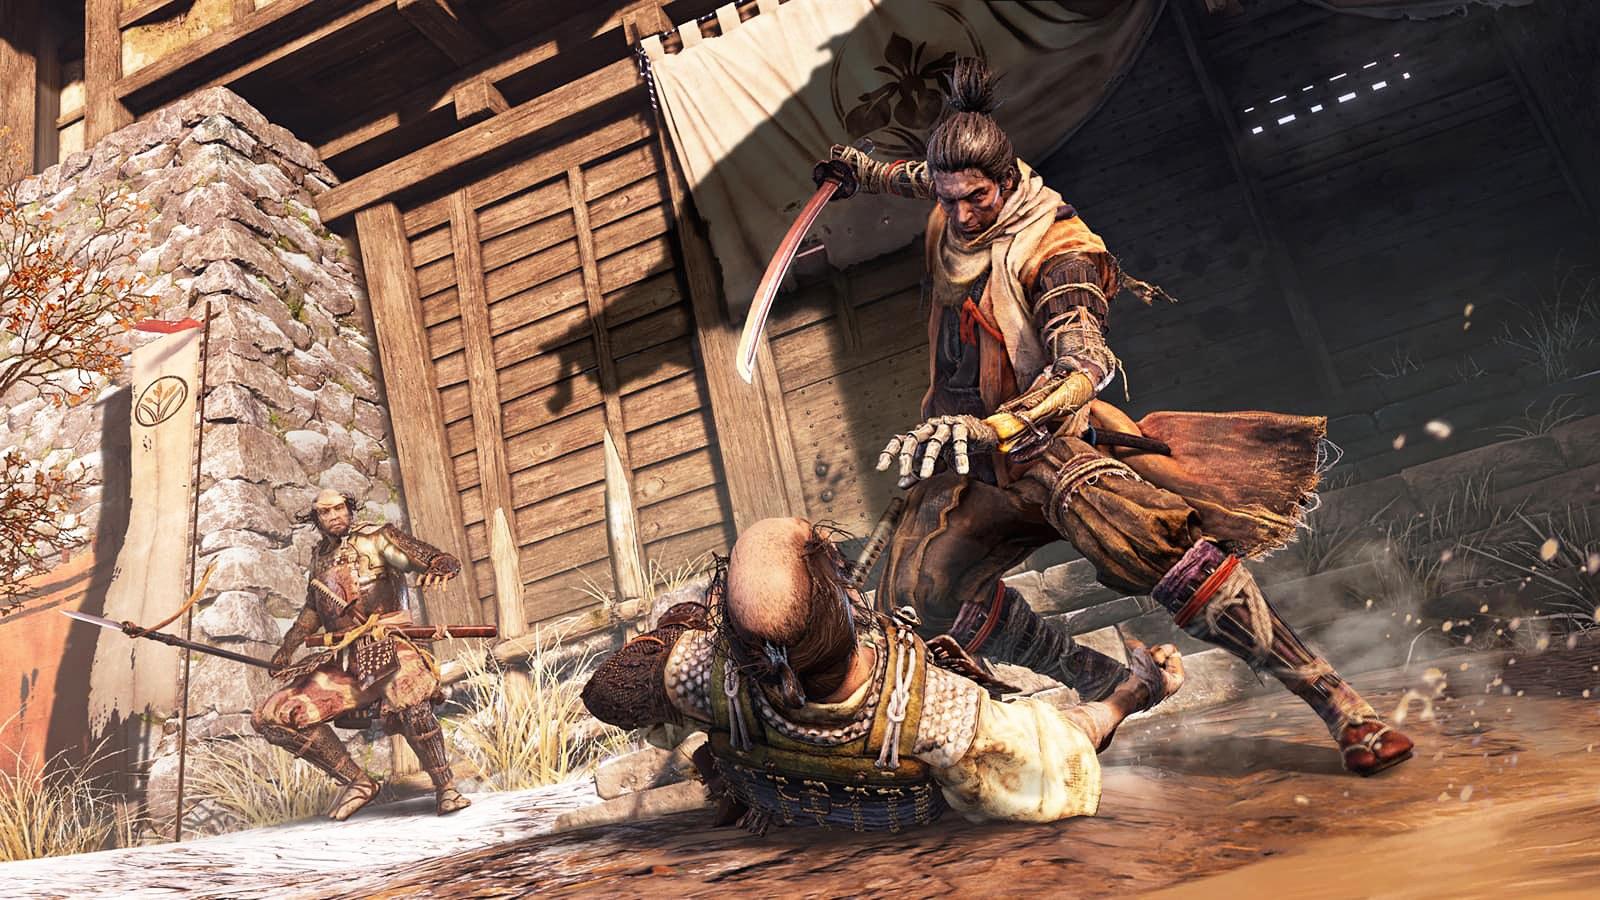 Sekiro: Shadows Die Twice' Review: Why I Love Games That Kick My Ass